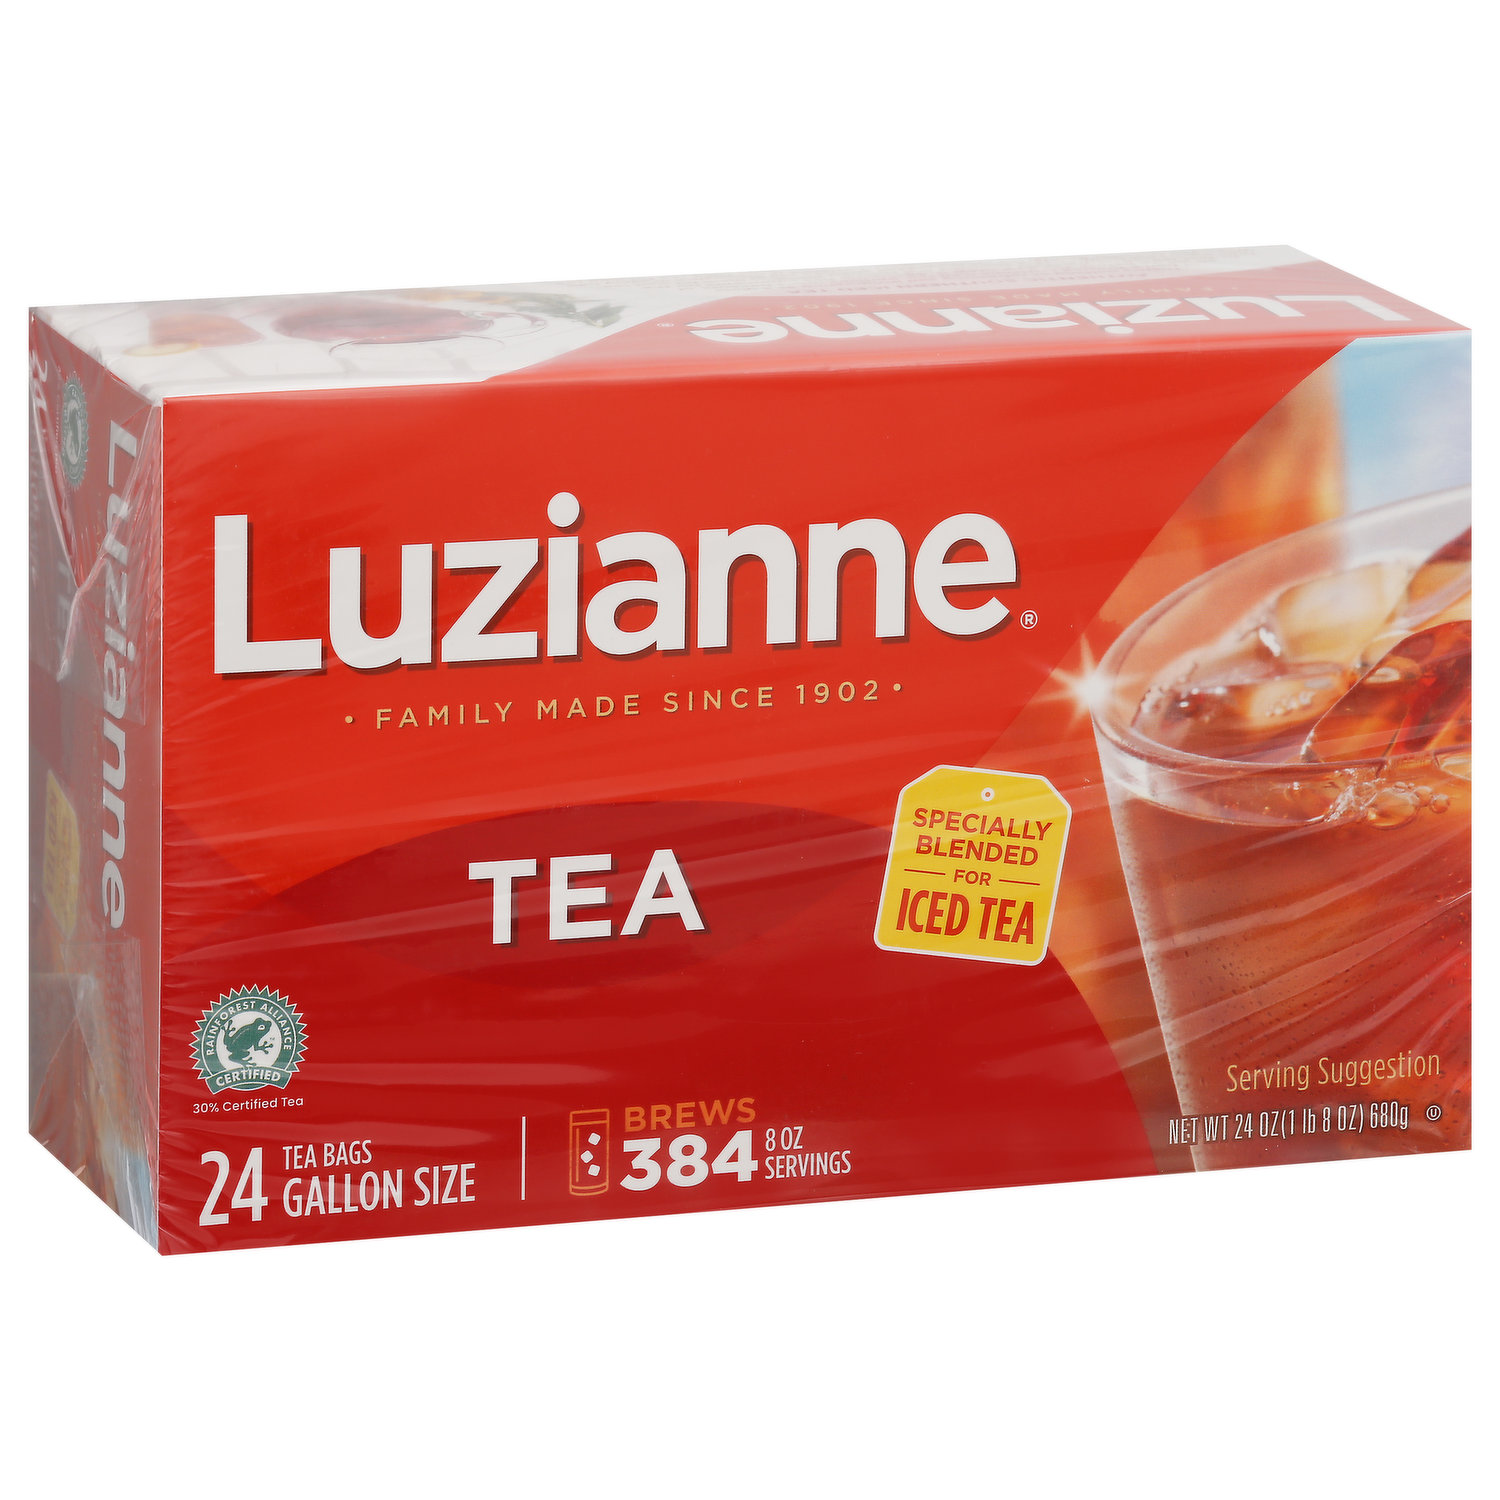 Iced Tea Cold Brew Tea and Other Products  Luzianne Tea